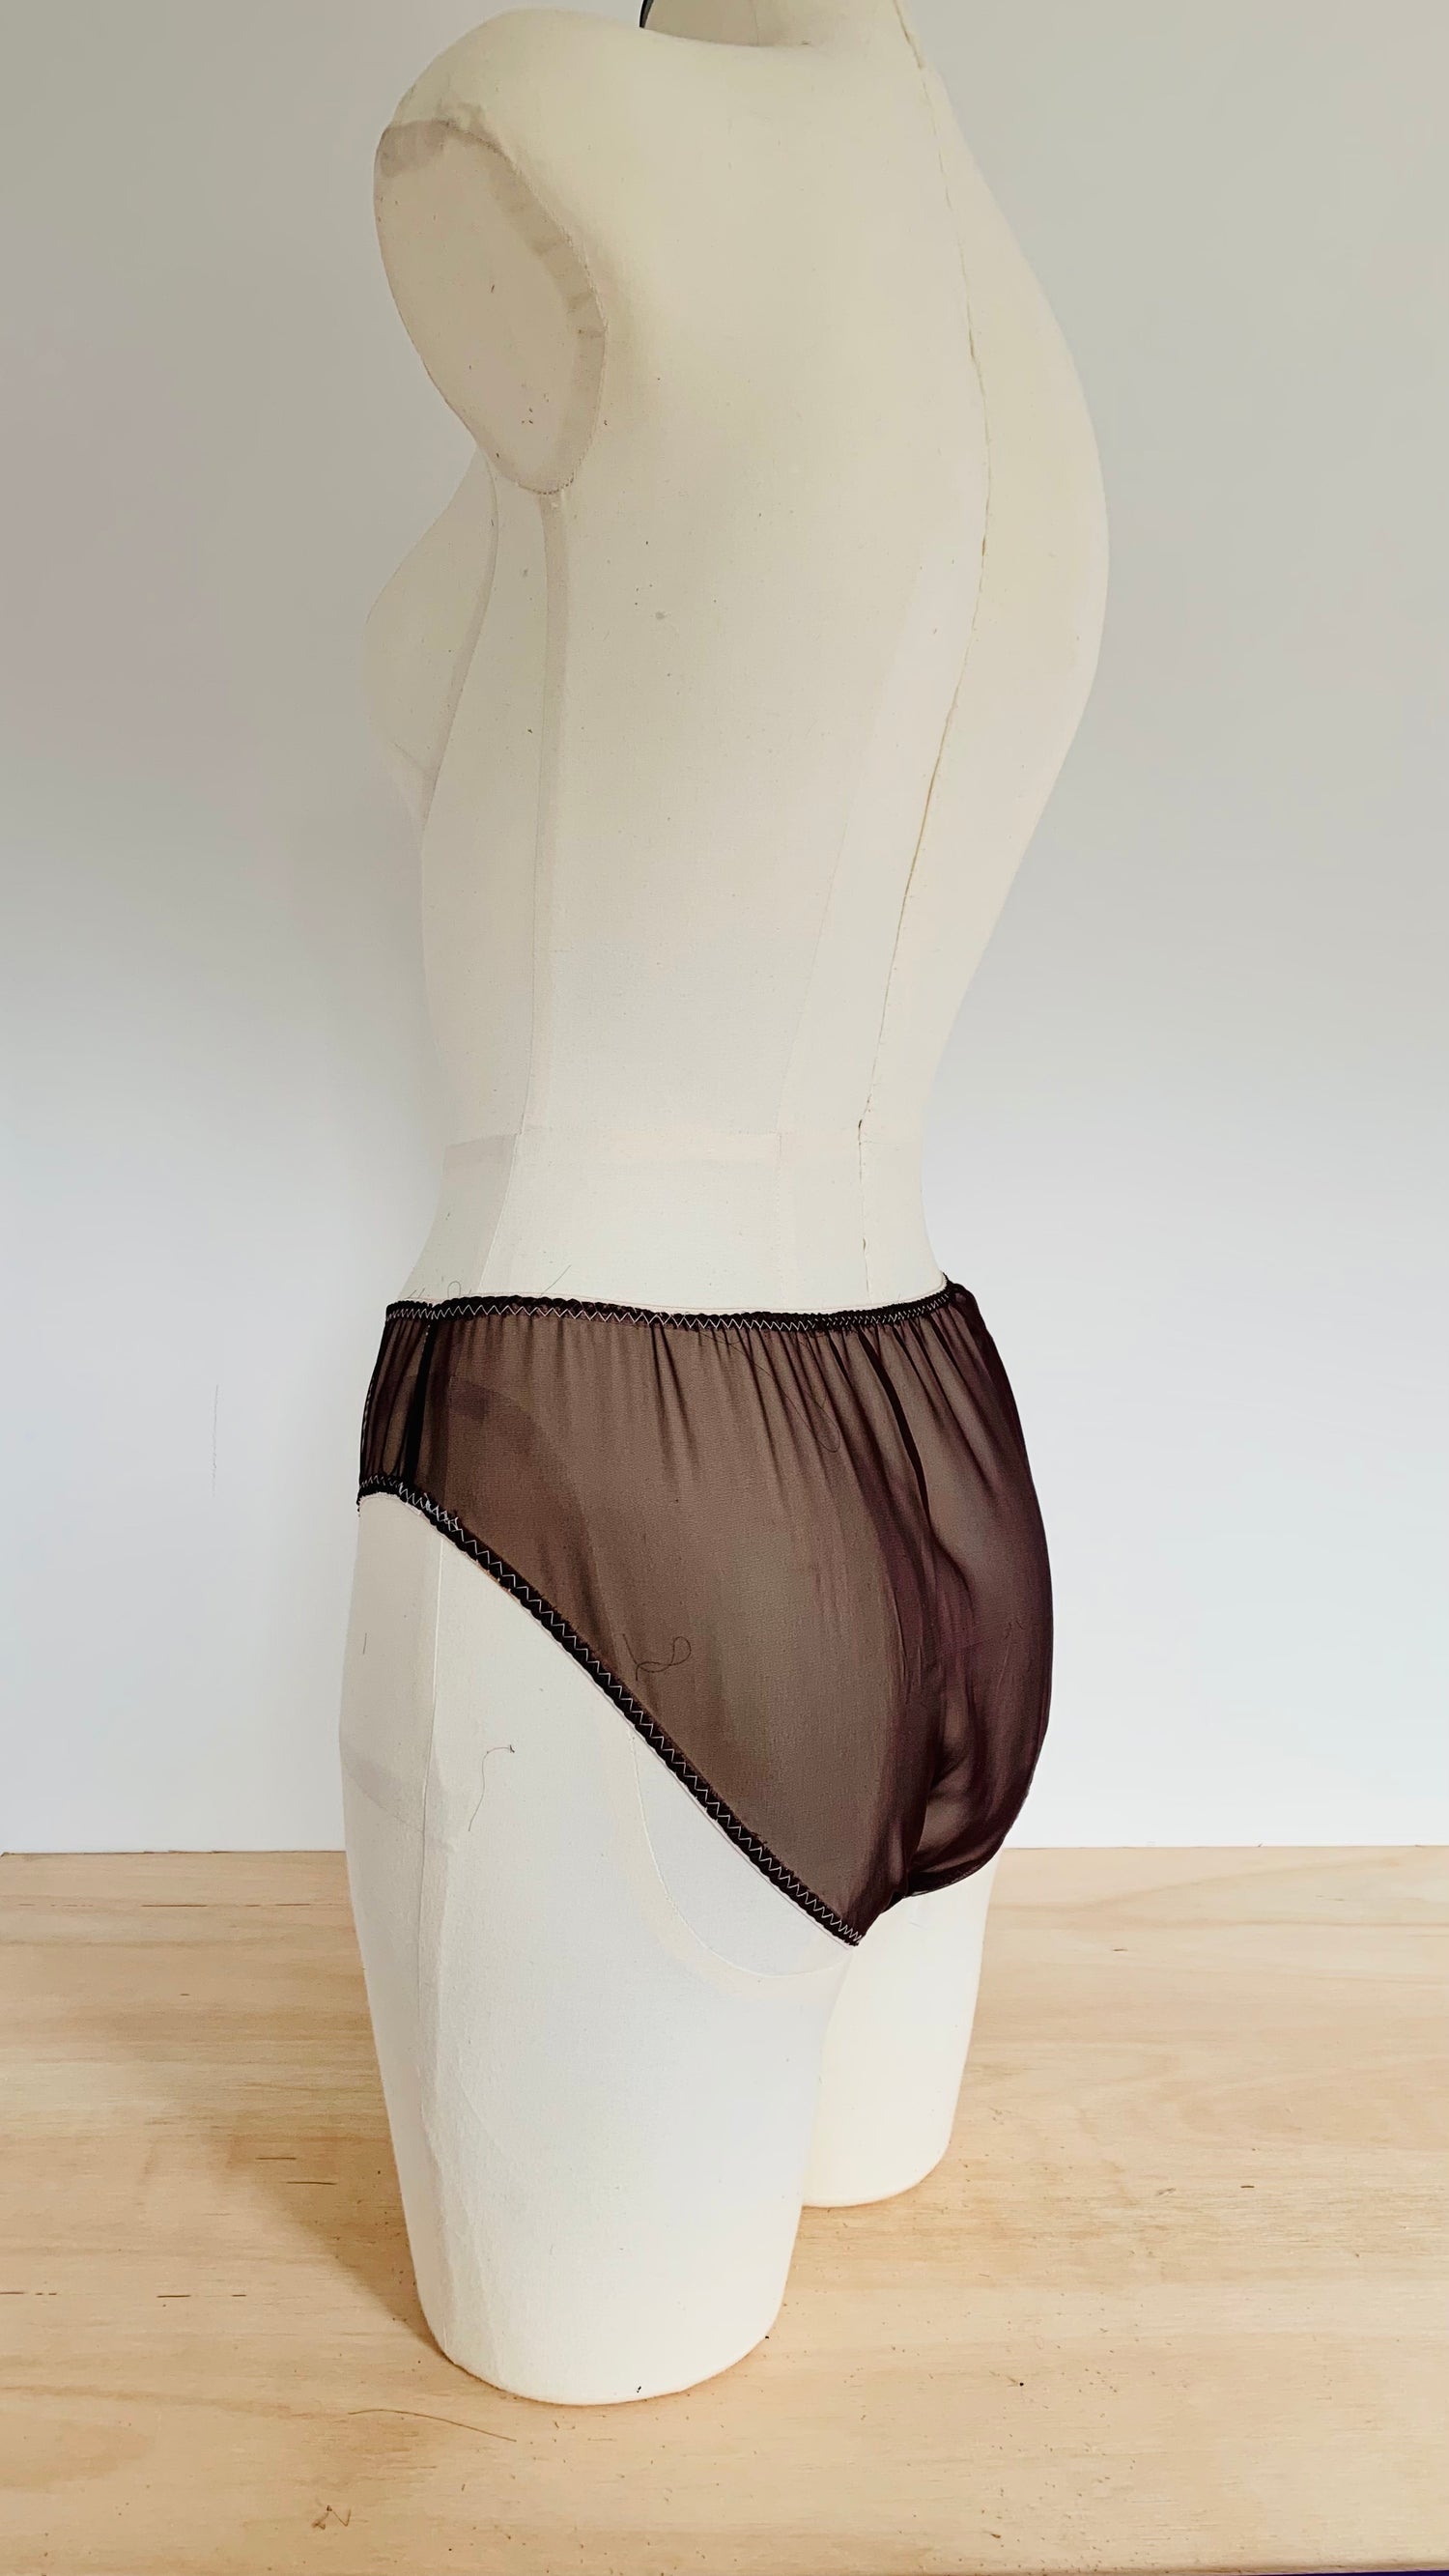 Free Classic Brief Sewing Pattern, PDF Instant Download UK